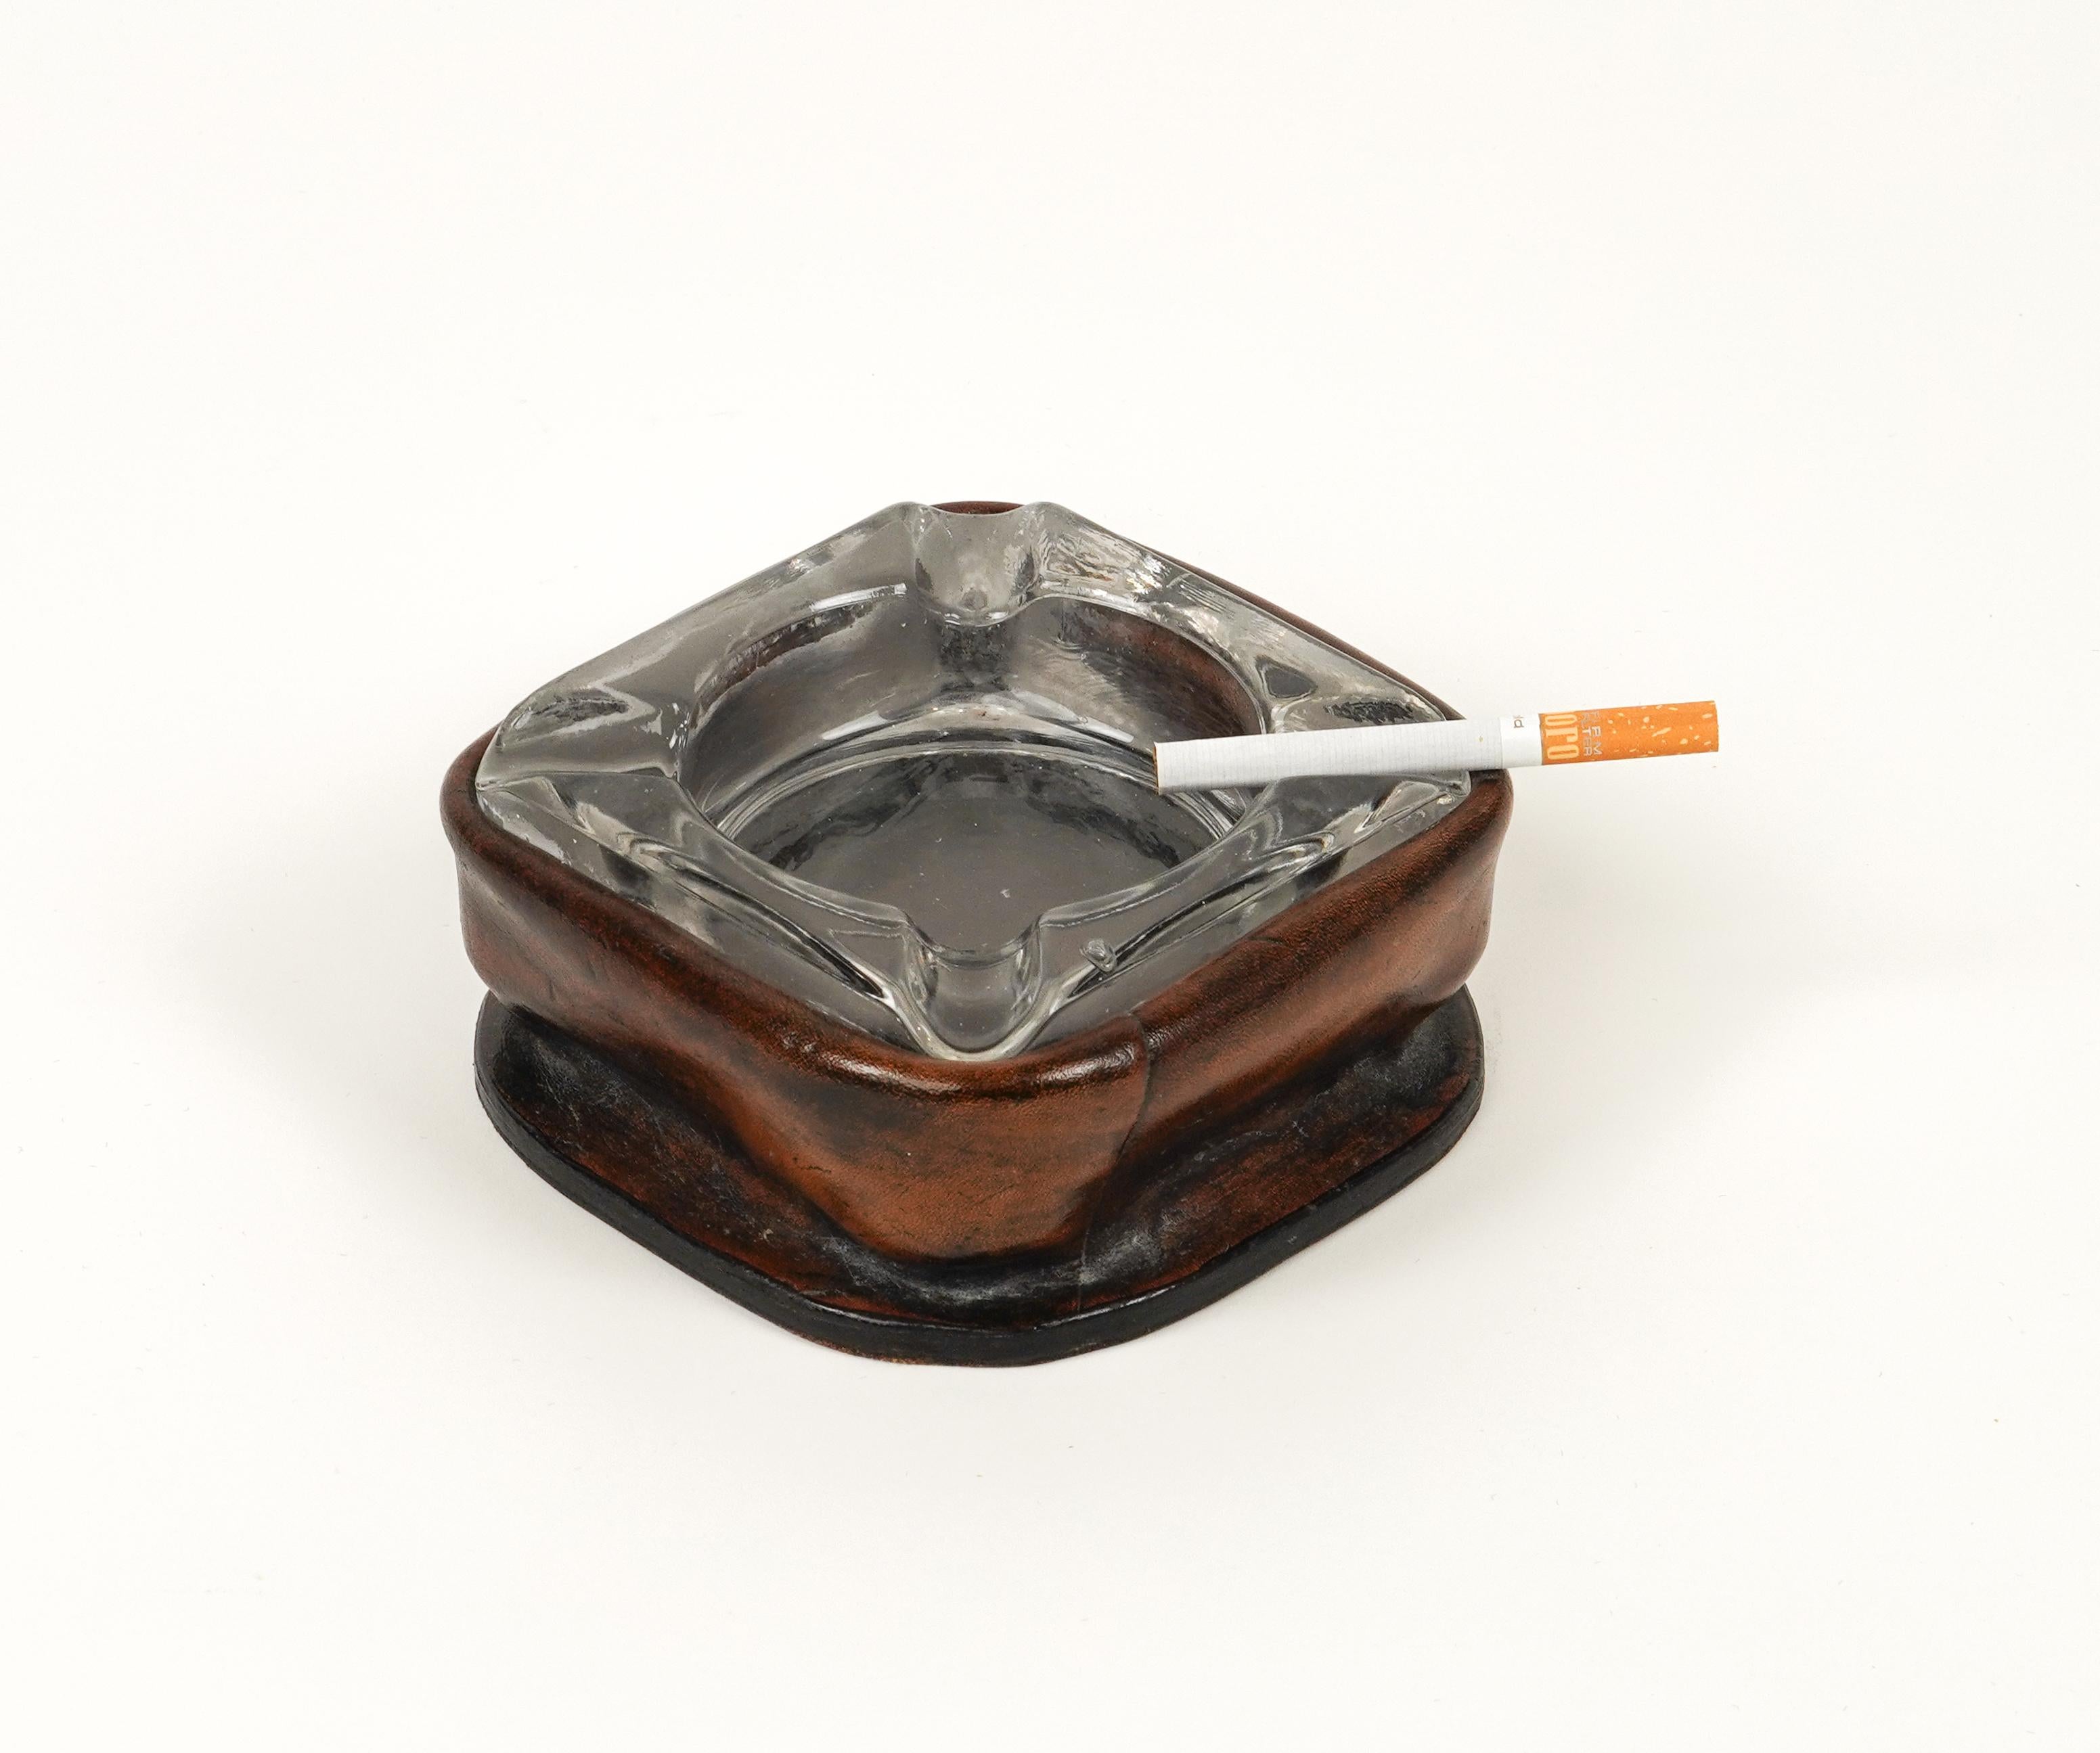 Midcentury Squared Ashtray in Leather and Glass Jacques Adnet Style, Italy 1970s For Sale 2